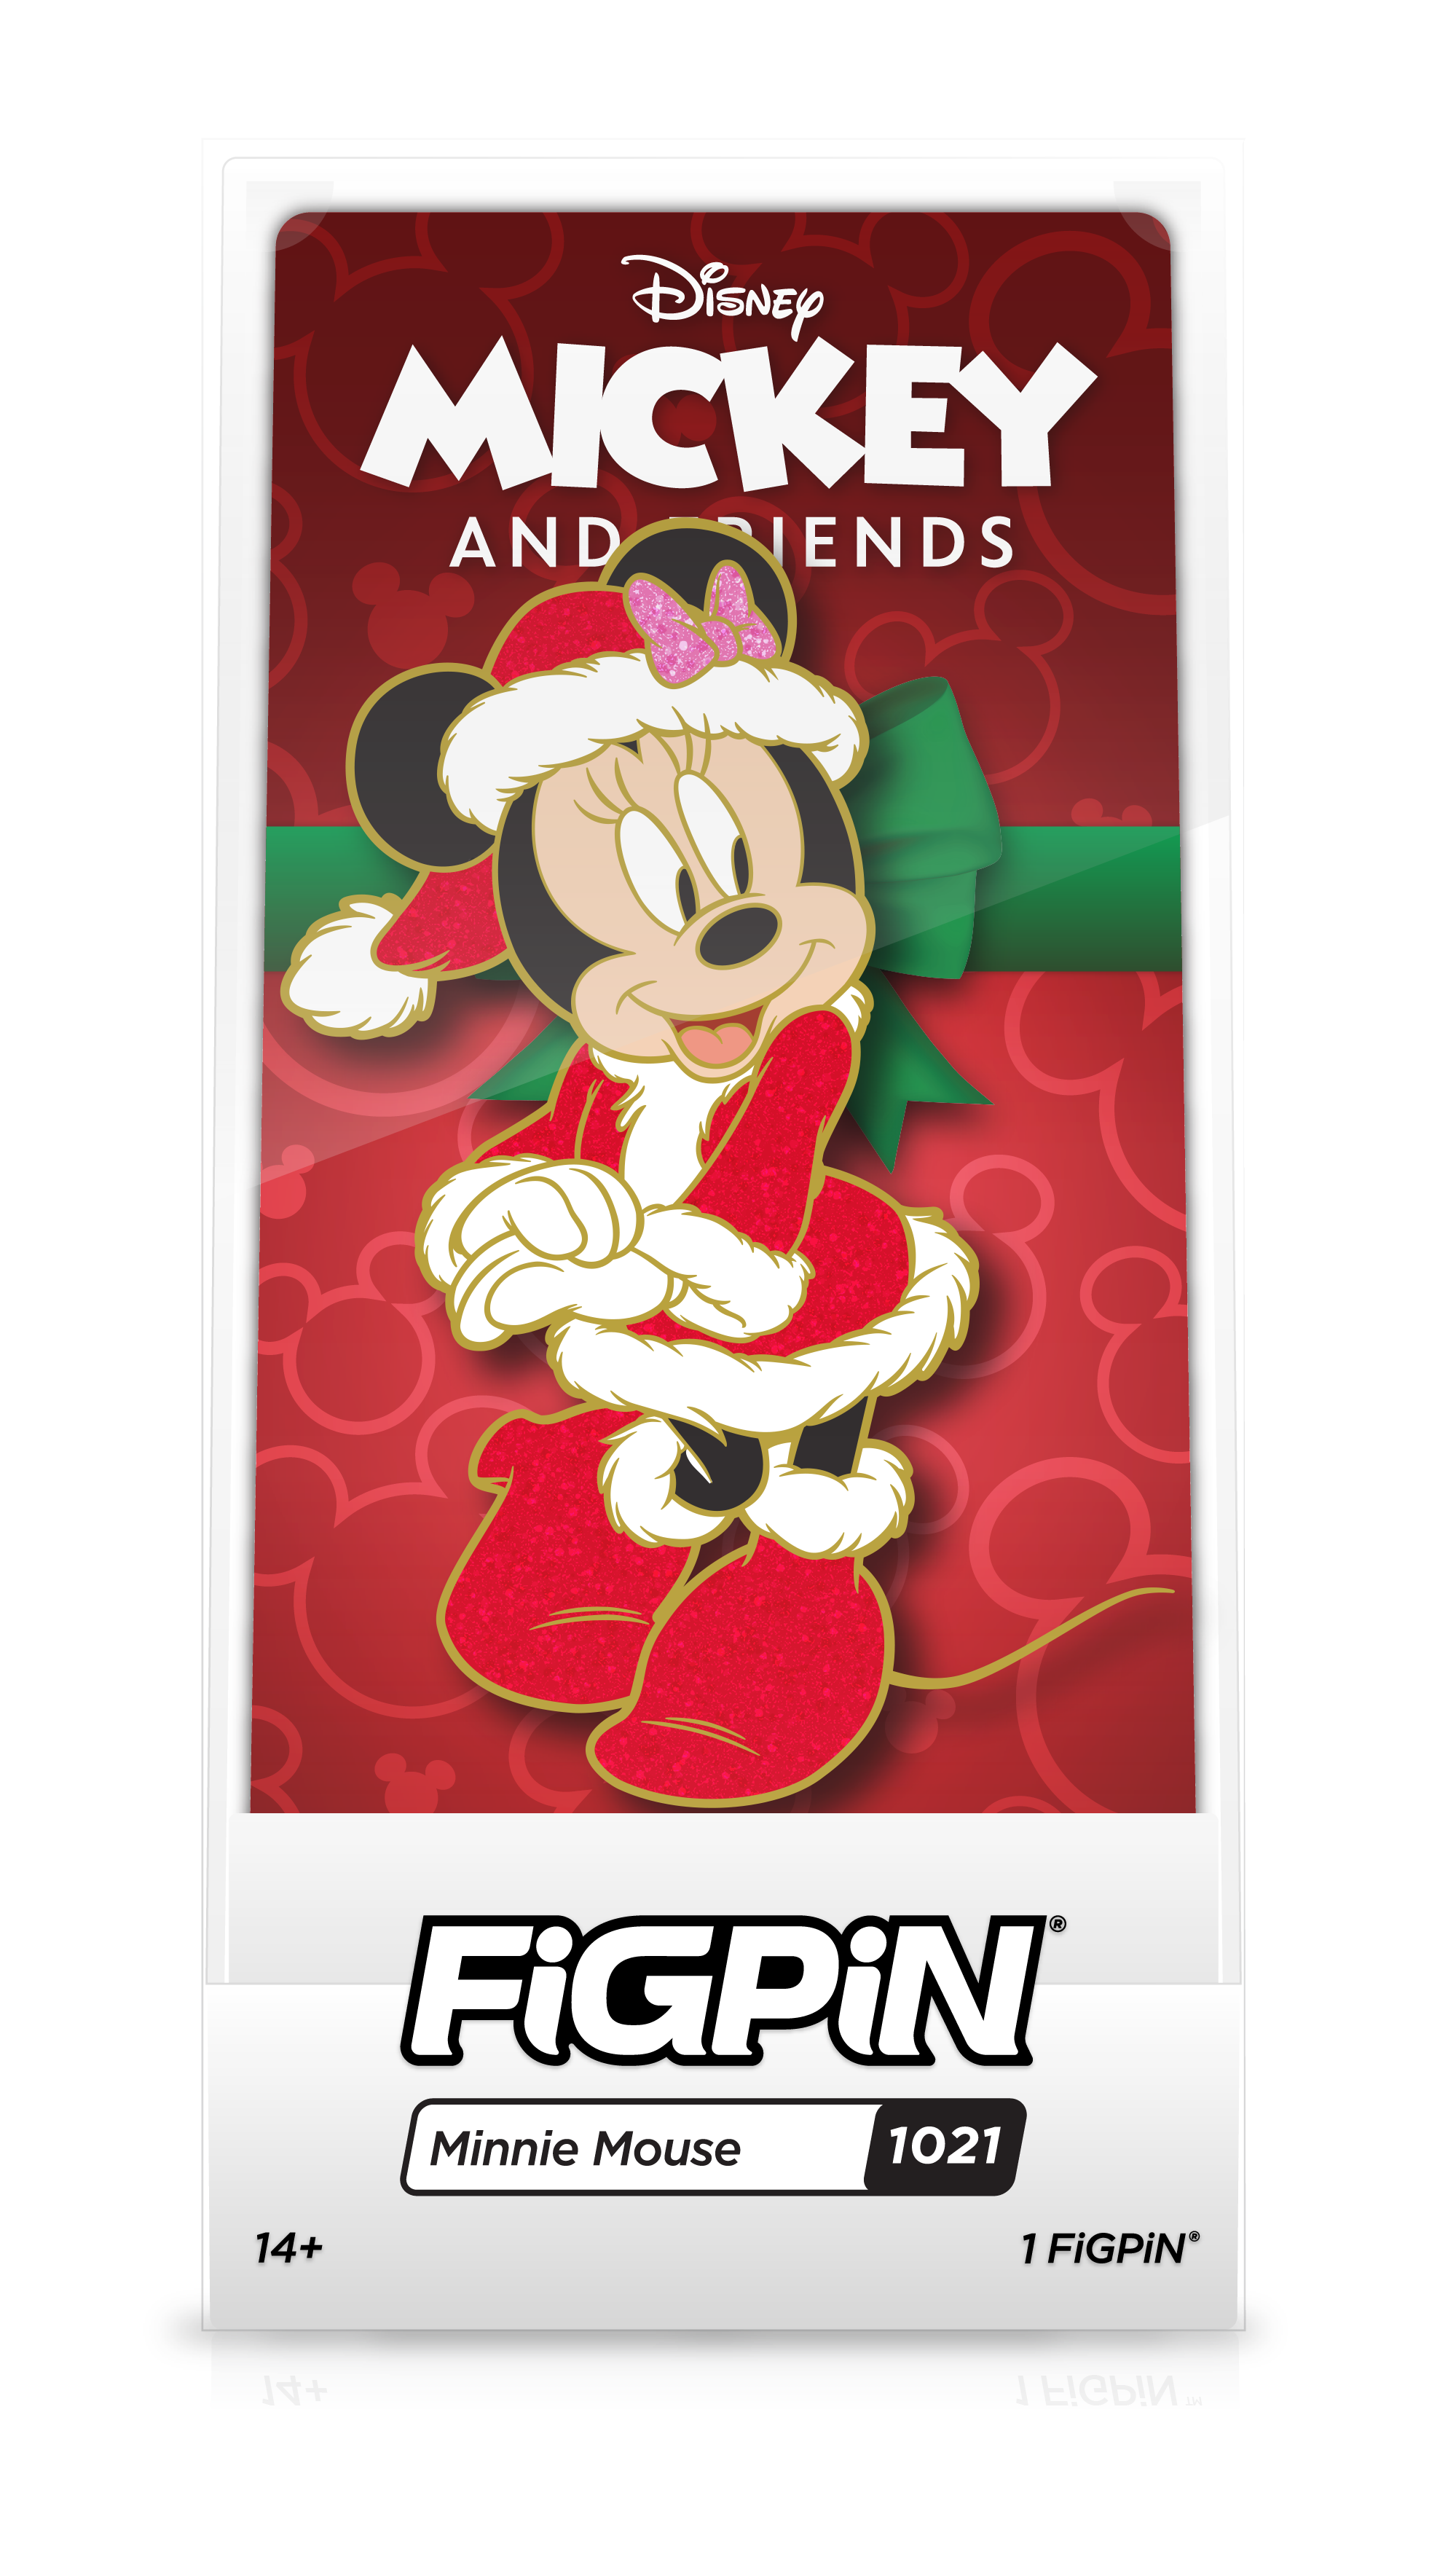 Front view of Disney's Mickey Mouse enamel pin inside FiGPiN Display case reading “FiGPiN - Minnie Mouse (1021)”